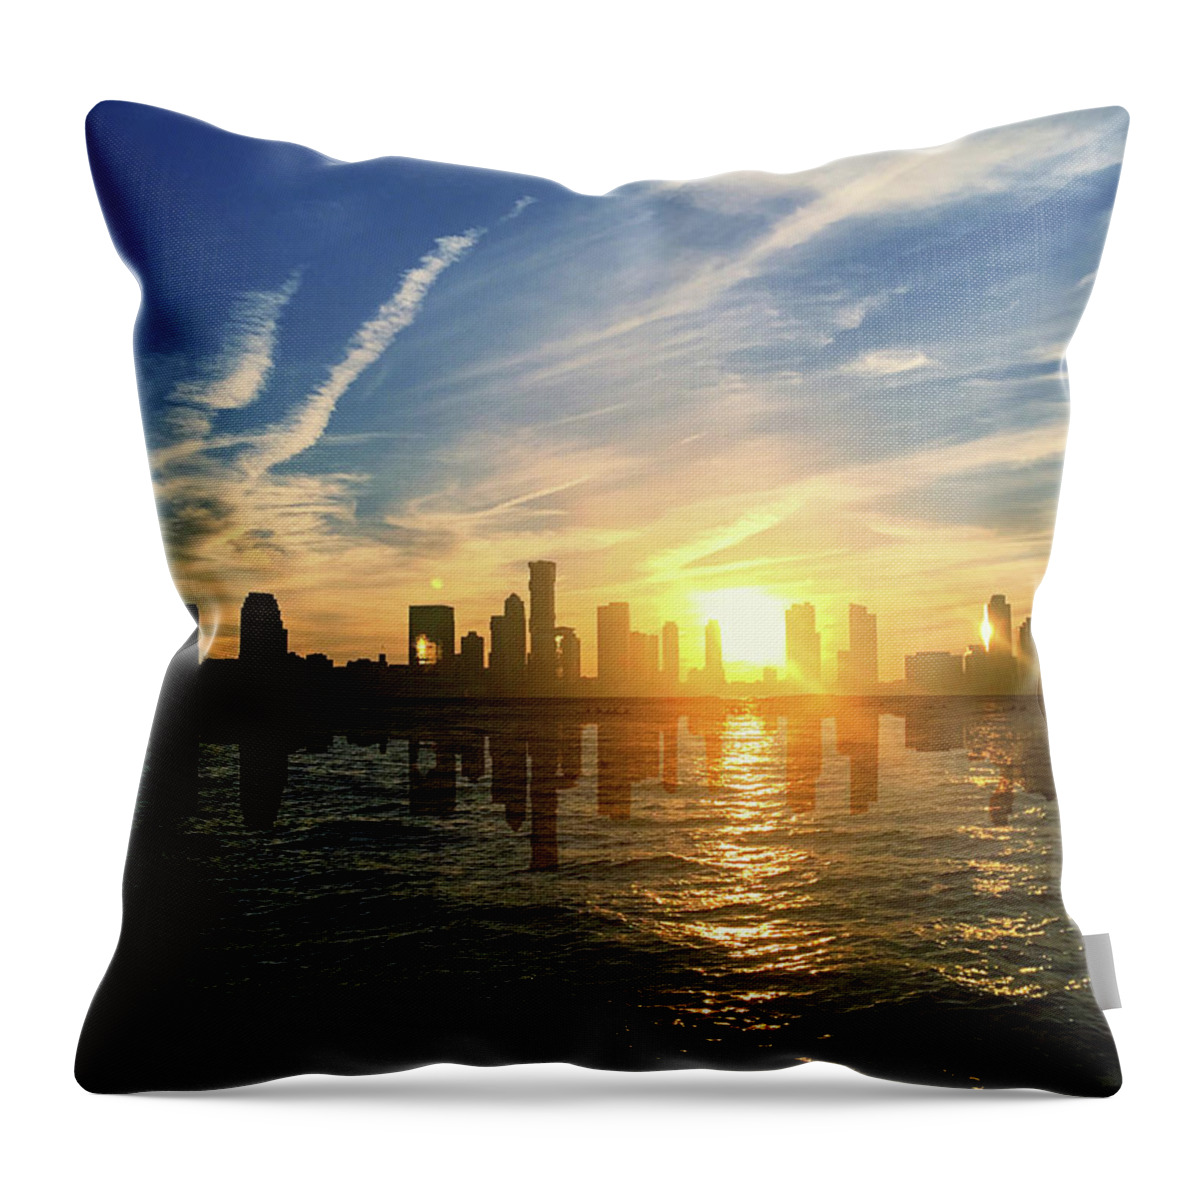 Sailing Throw Pillow featuring the photograph Sailing Views Of Ny by Acosta